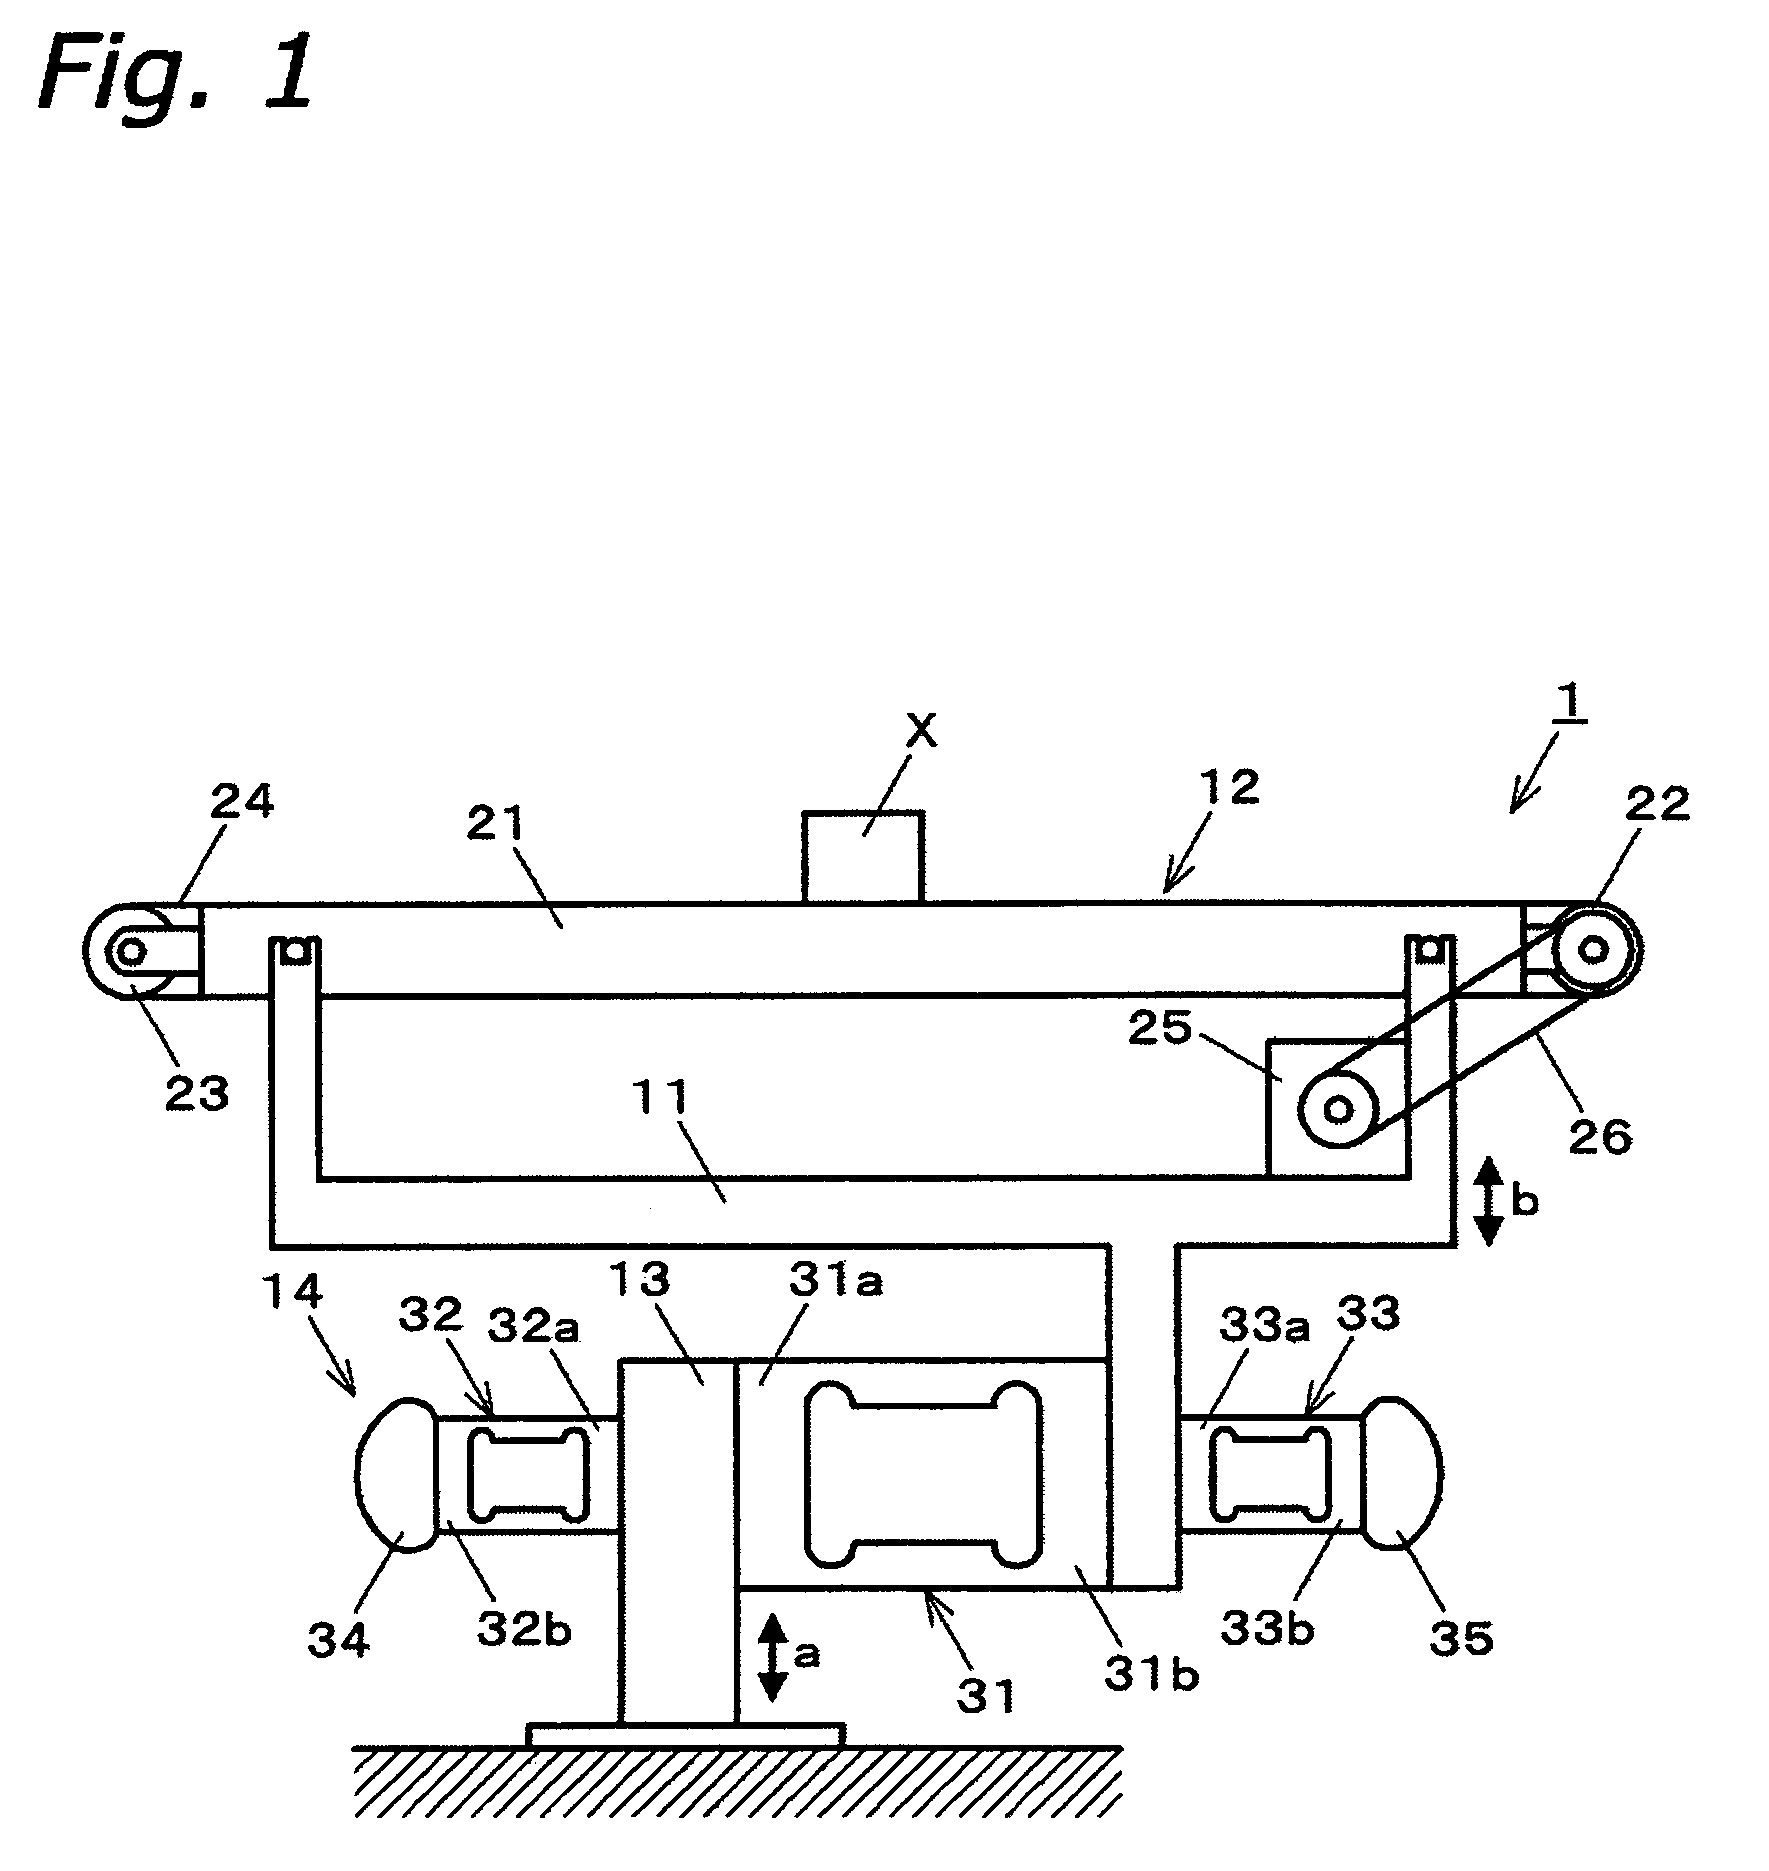 Weight detecting apparatus with vibrational sensors attached to both the free end and the fixed end of the load cell